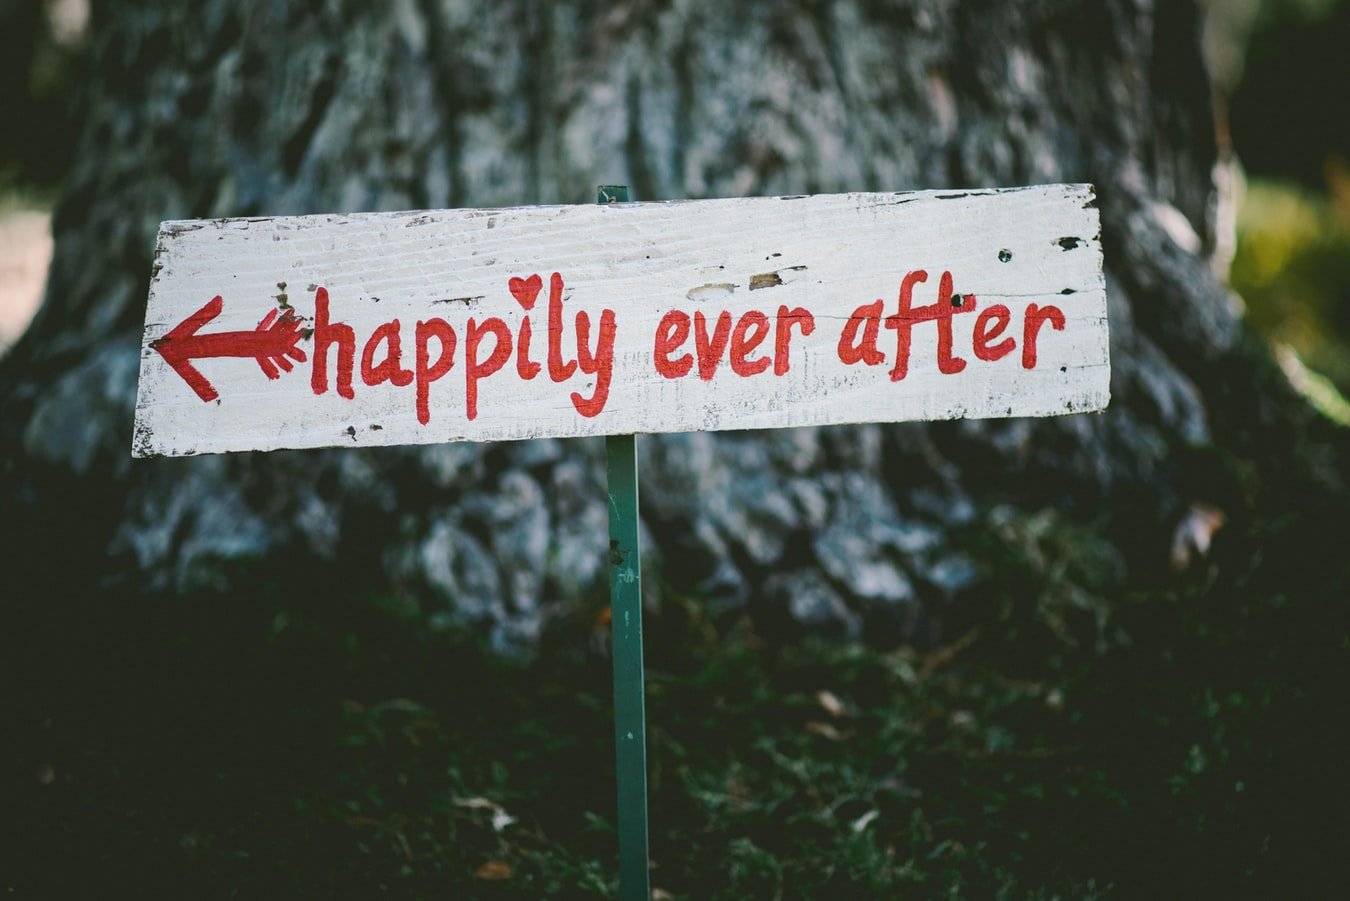 Happily ever after | Source: Unsplash